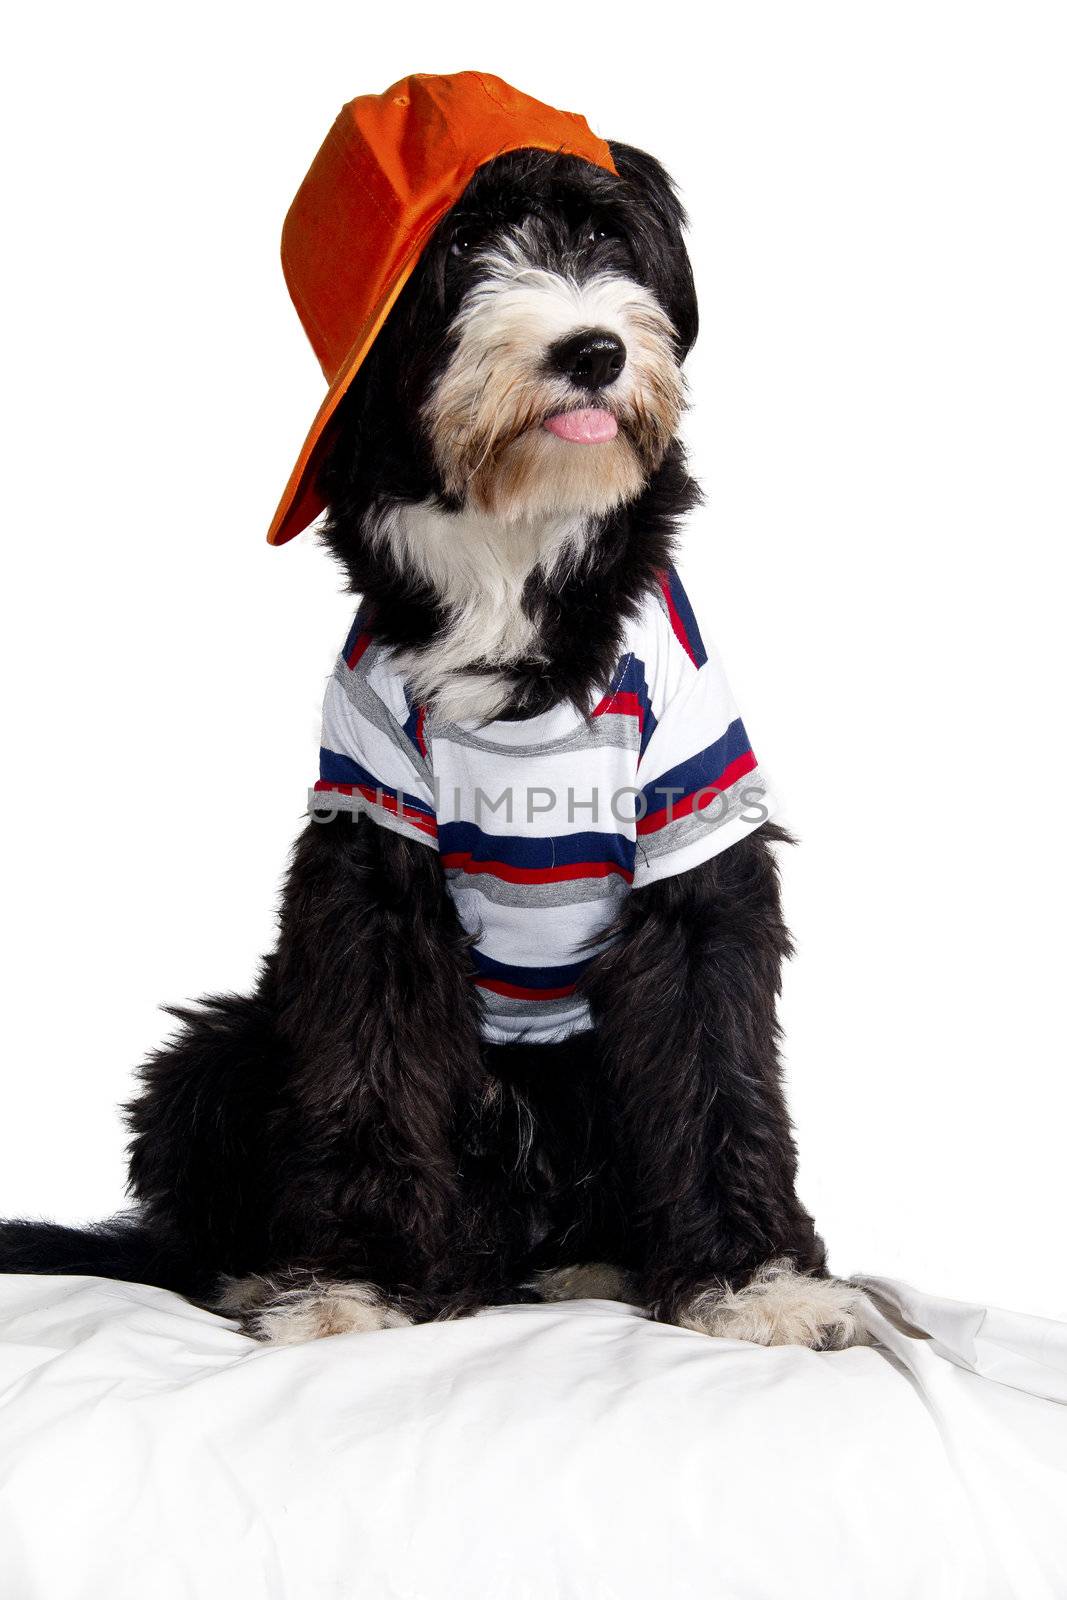 bobtail dog breed that makes the hat with spiteful